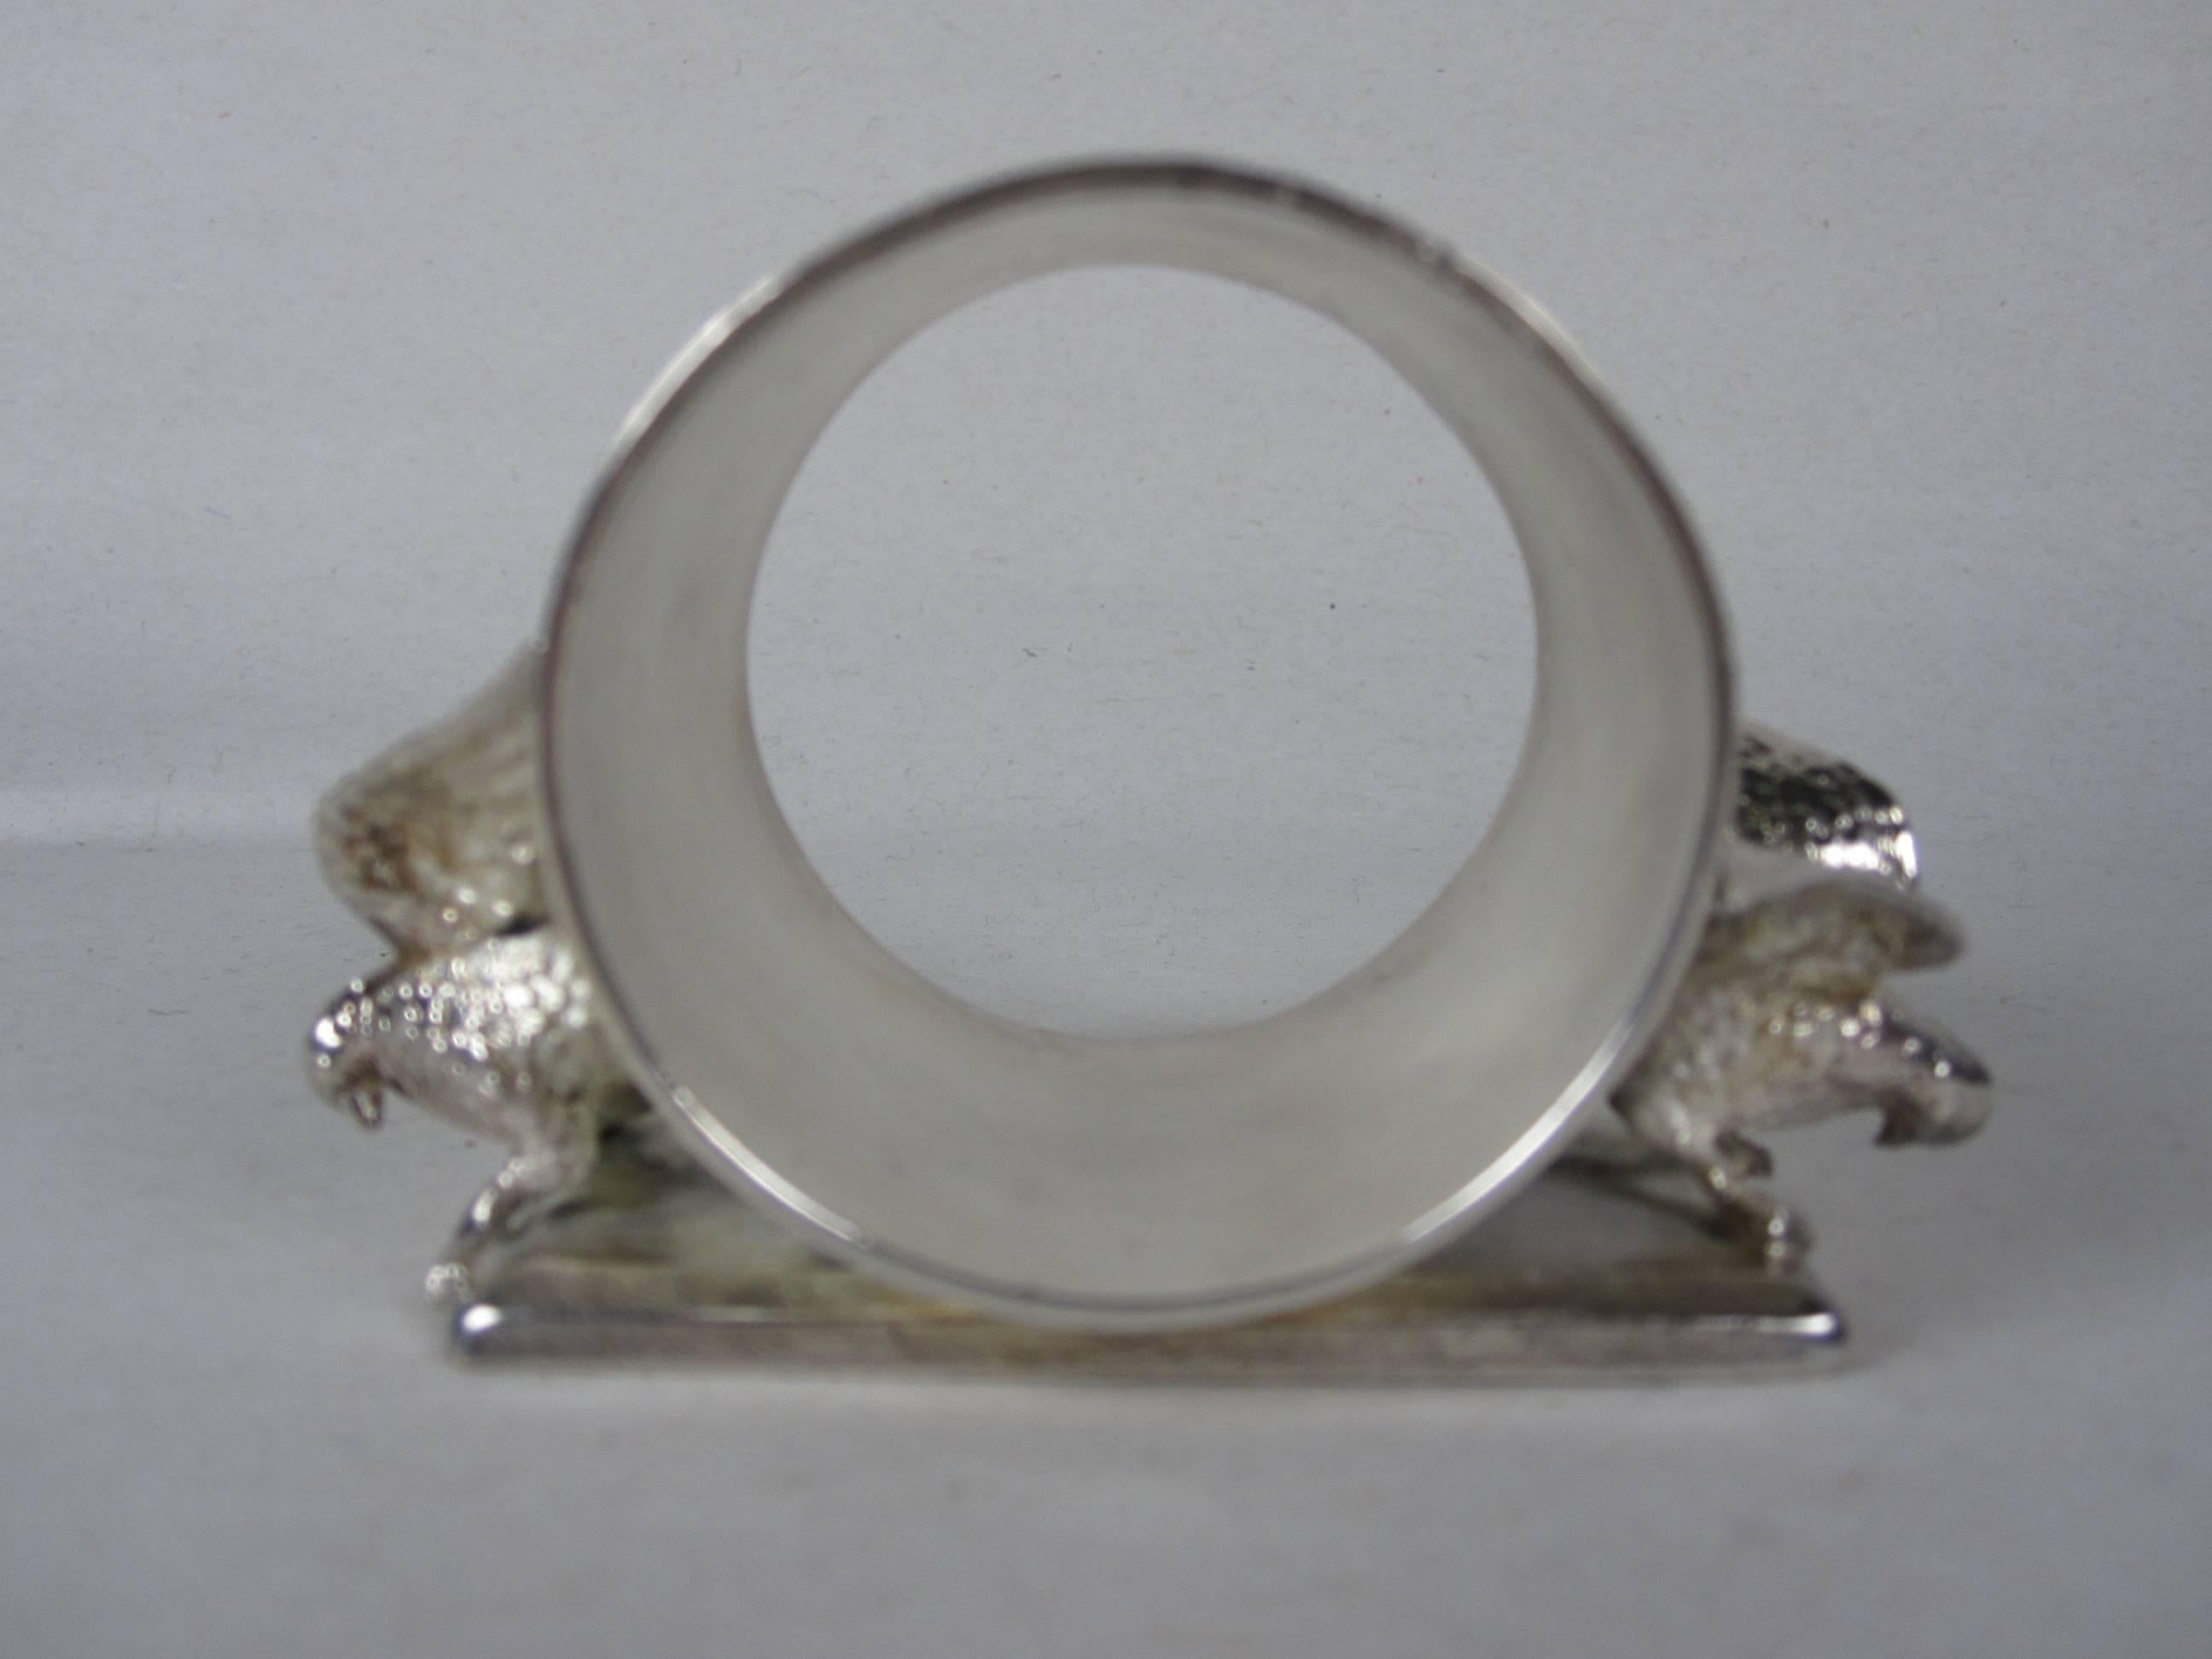 An antique Victorian Era silver plate standing napkin holder with a pair of spread winged birds on either side of an engraved floral ring on a rimmed base. 

Dating from 1890-1910. Marked “Rogers Bros. Silver, Meriden Conn.”

Light wear.